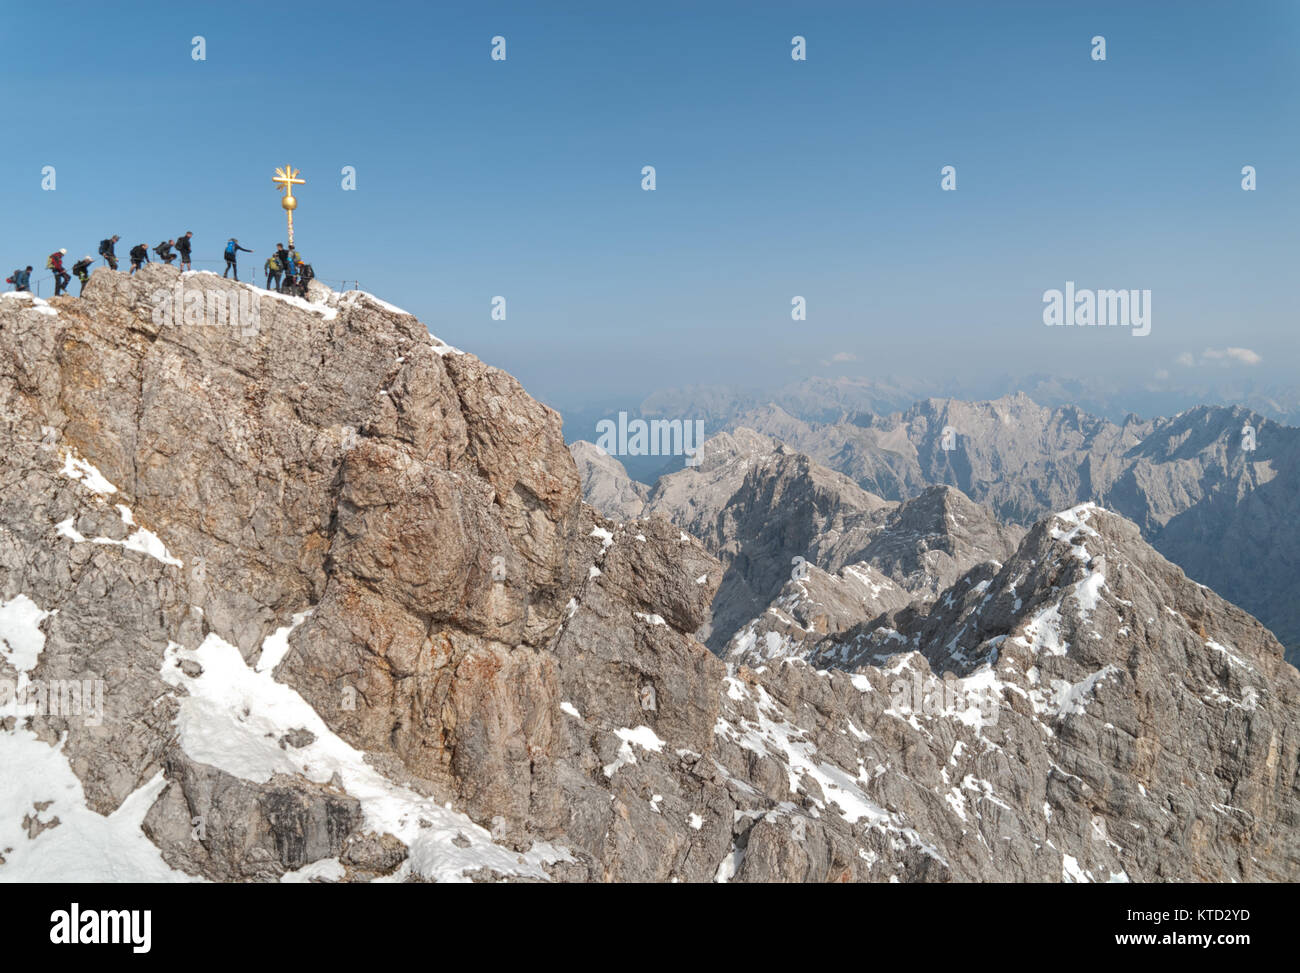 Mountaineers on the summit of Zugspitze, Germany Stock Photo